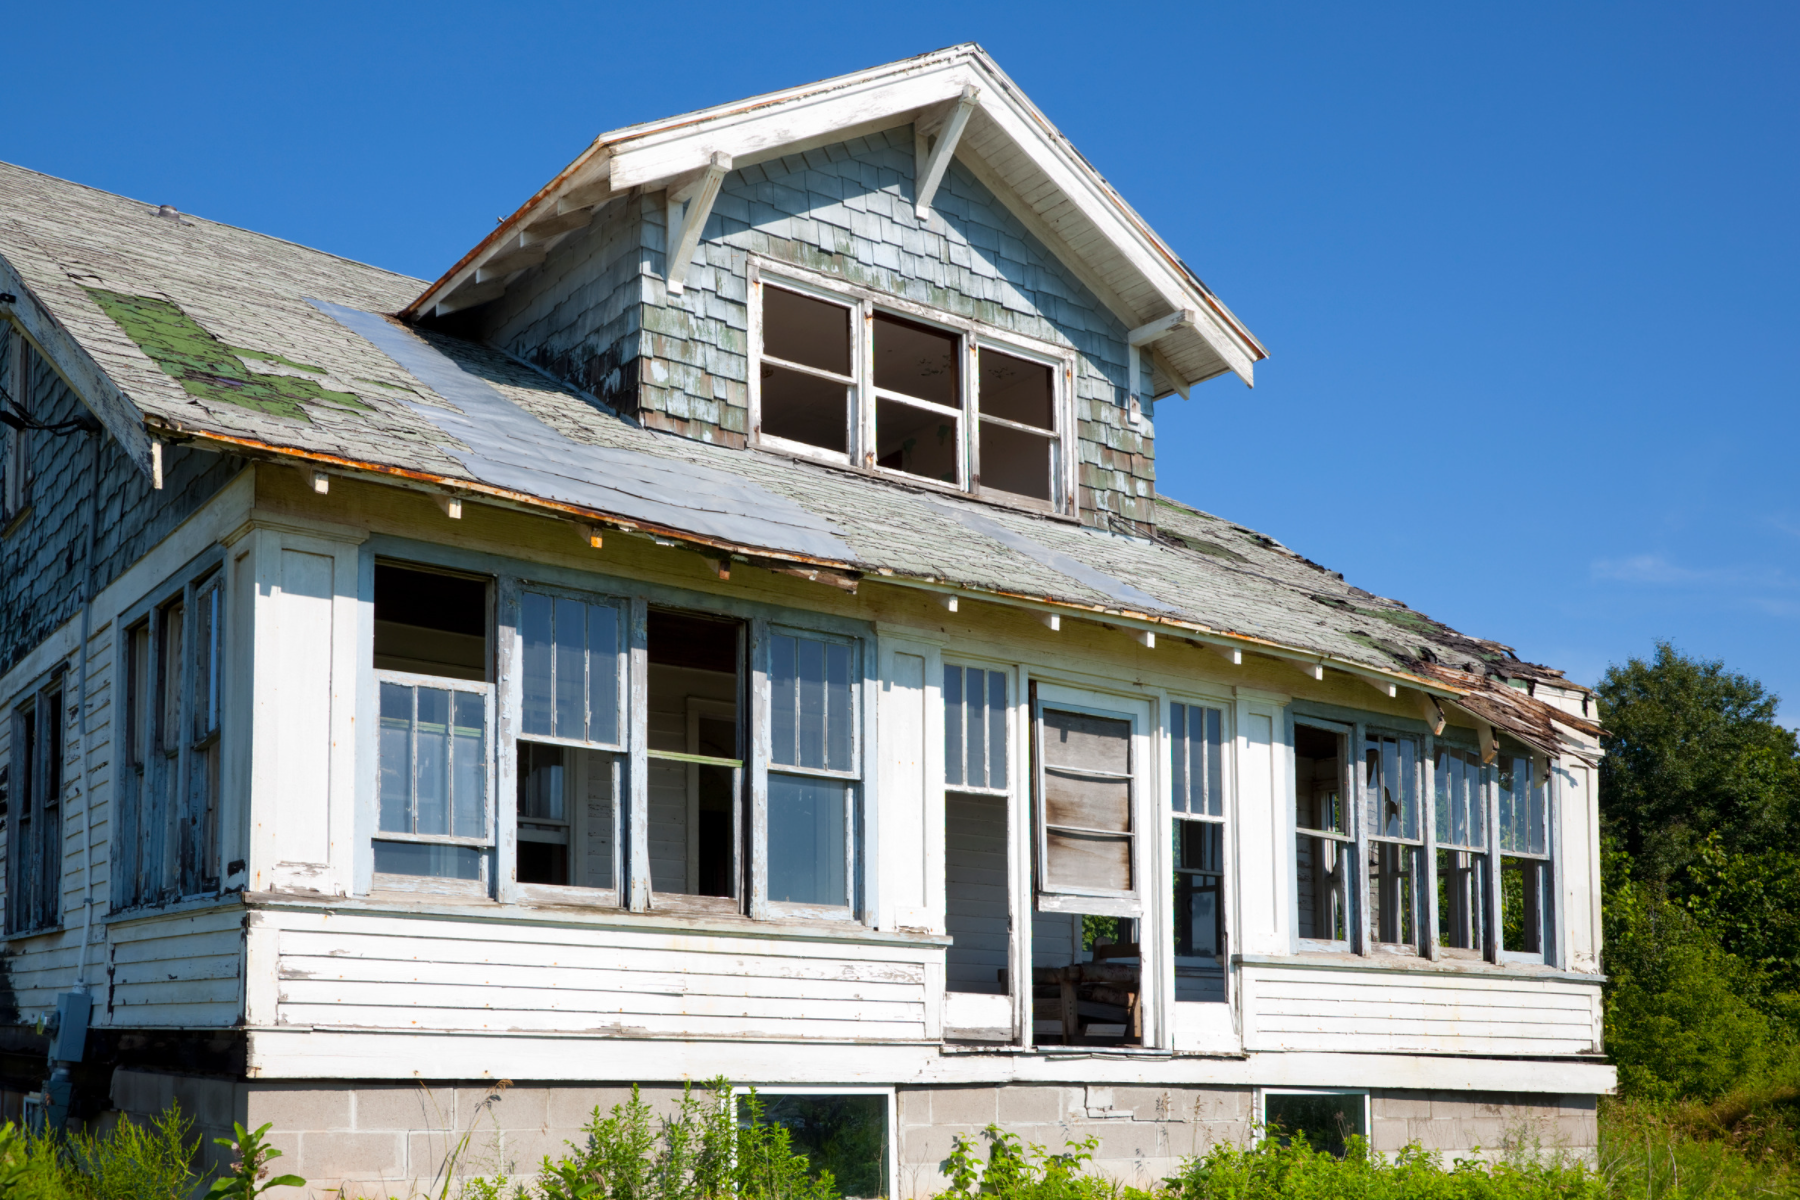 What Are Distressed Properties and Why Do They Matter?